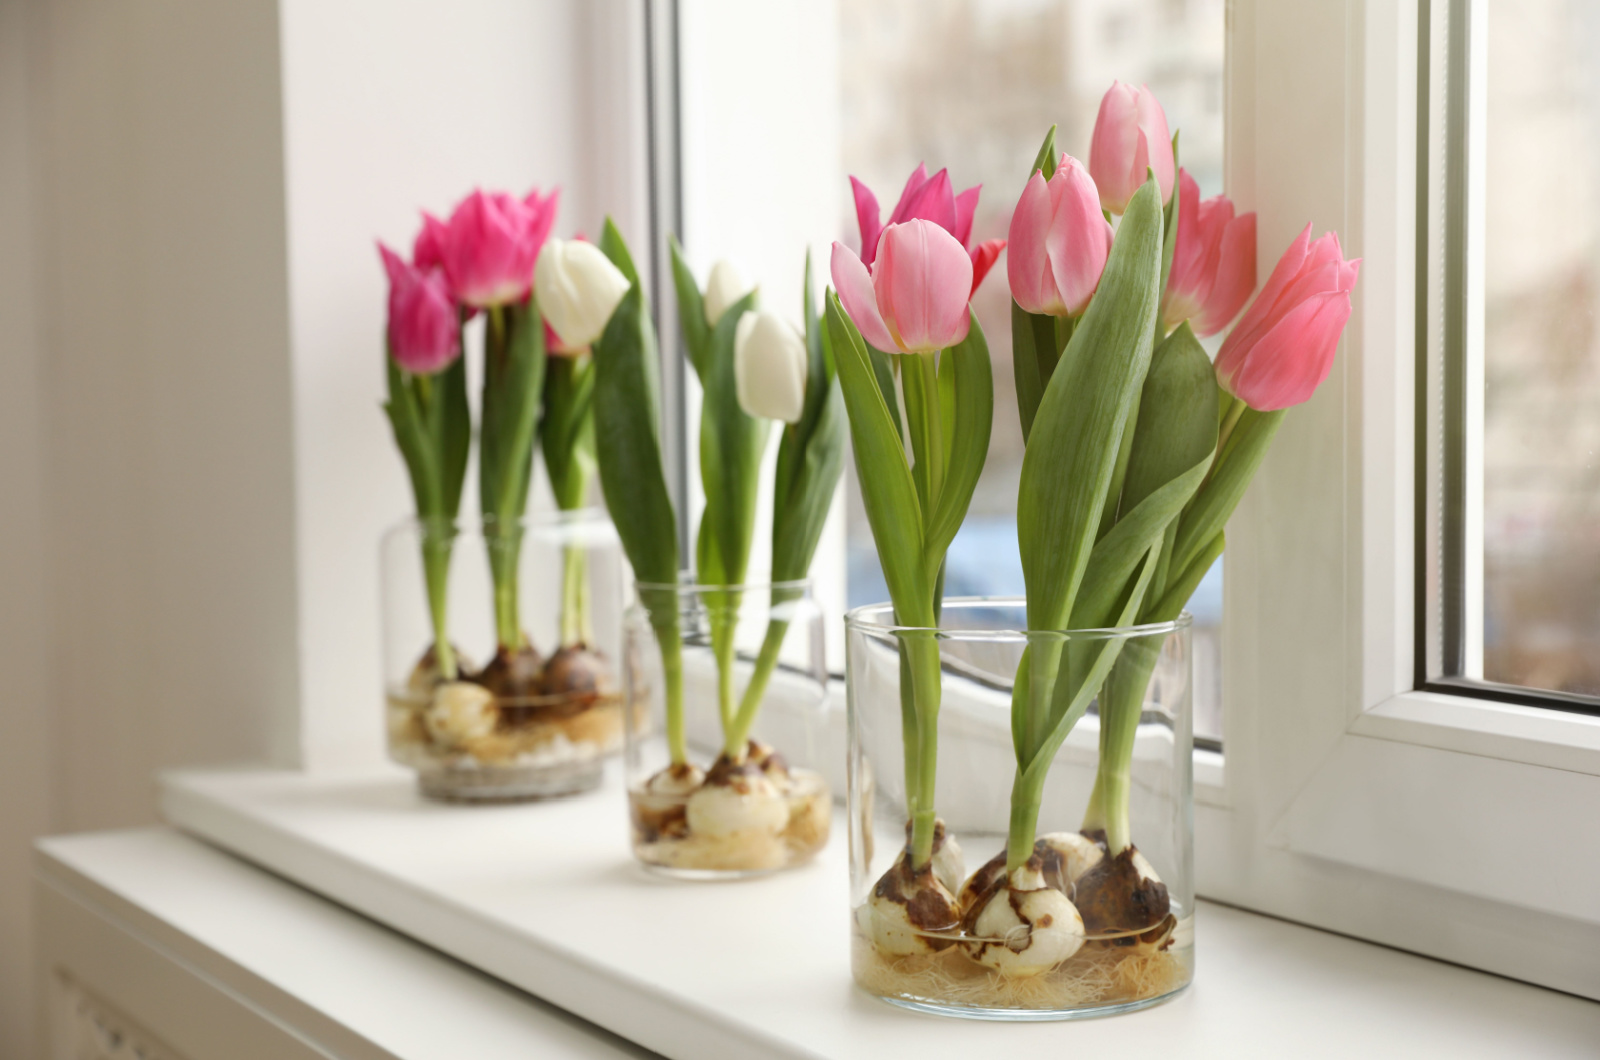 tulips with bulbs in a vase on window sill